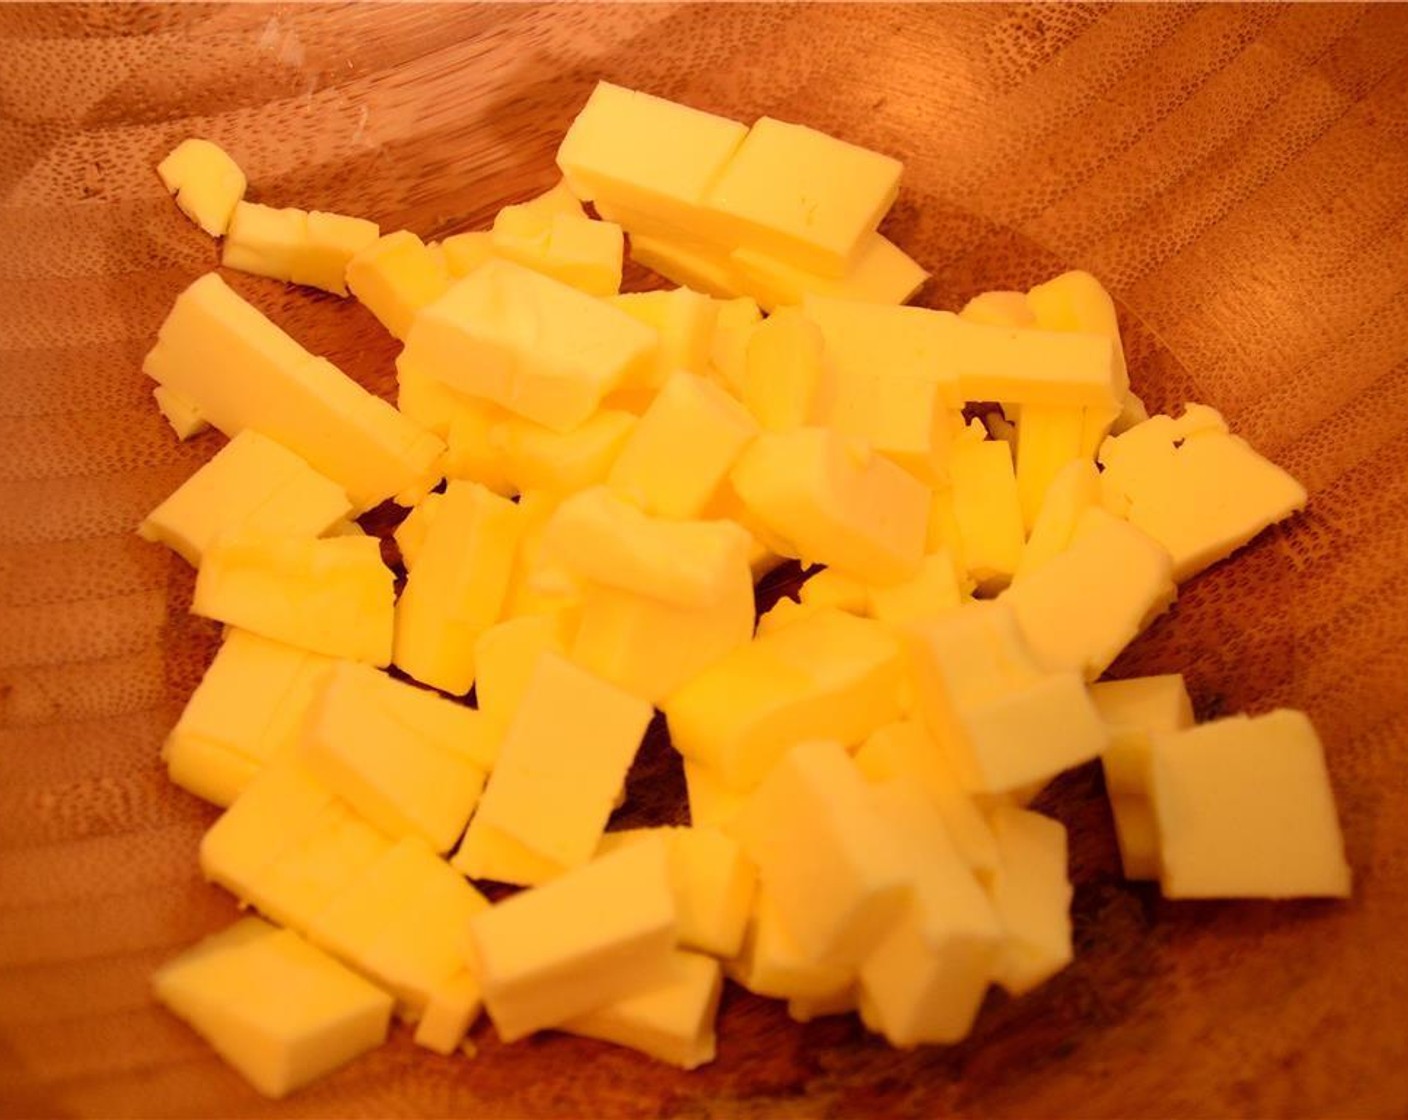 step 2 Dice the unsalted butter into cubes, and allow it to soften.